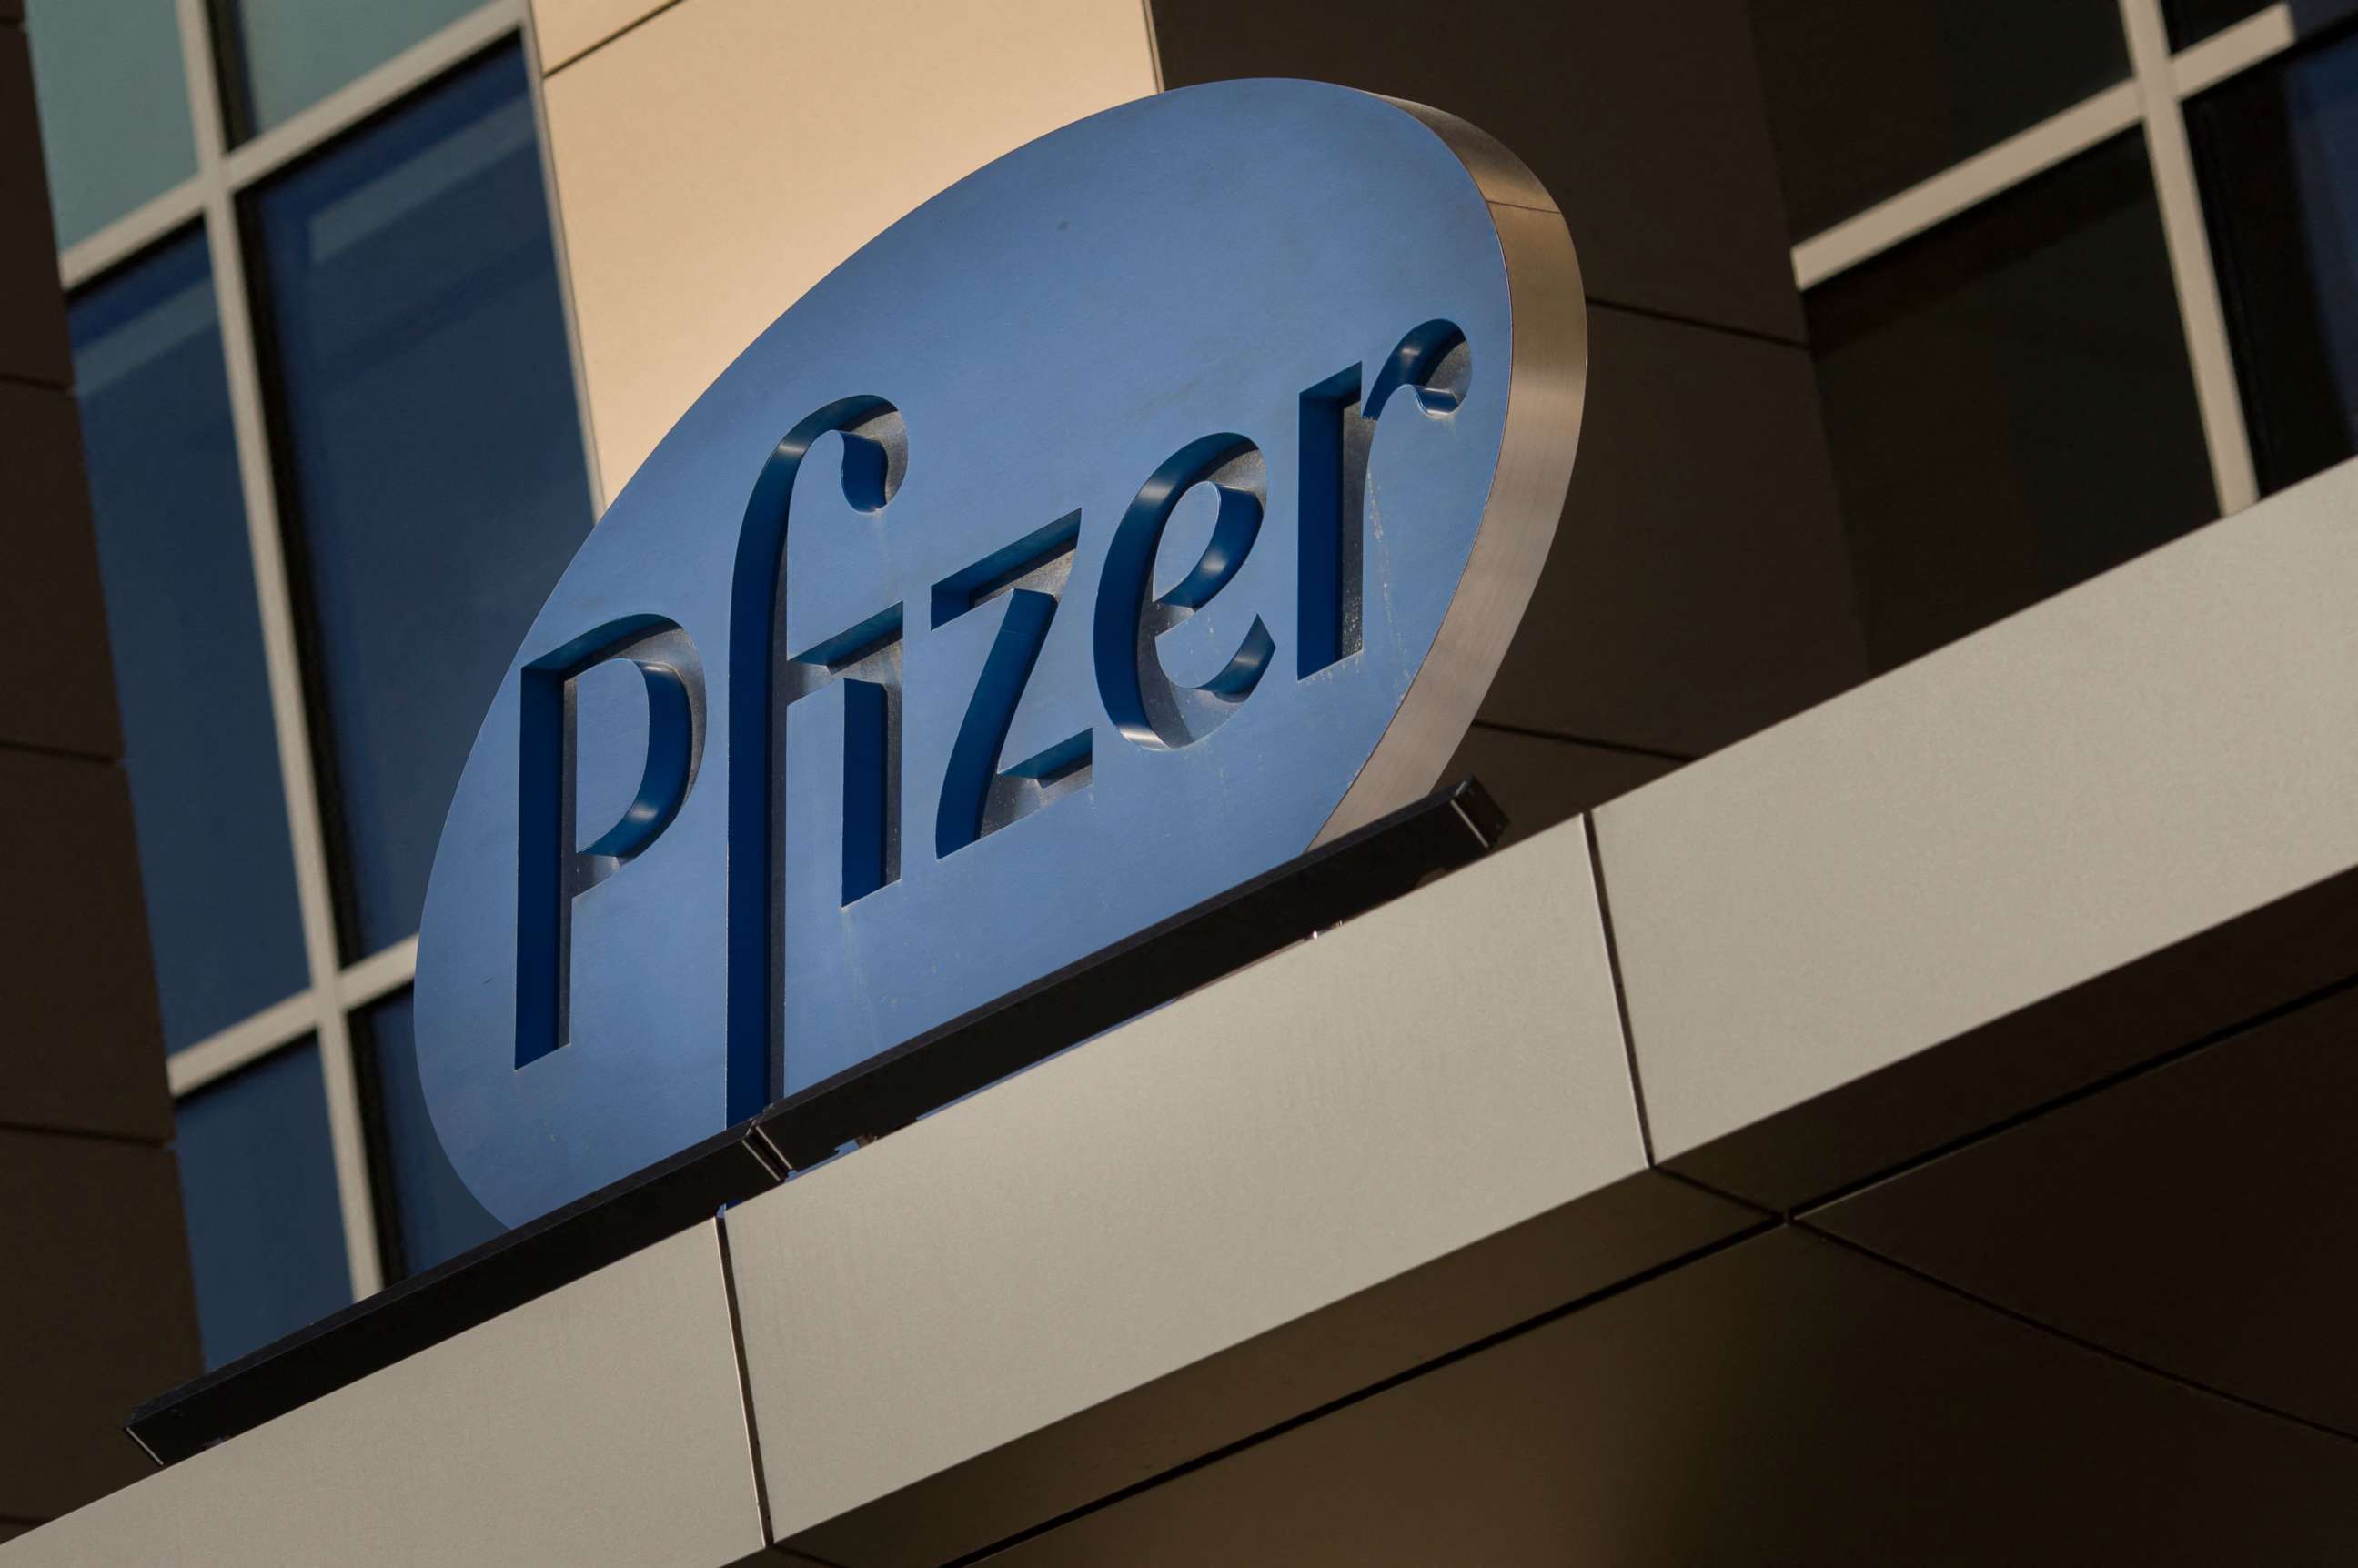 PHOTO: In this file photo a sign for Pfizer pharmaceutical company is seen on a building in Cambridge, Massachusetts. 